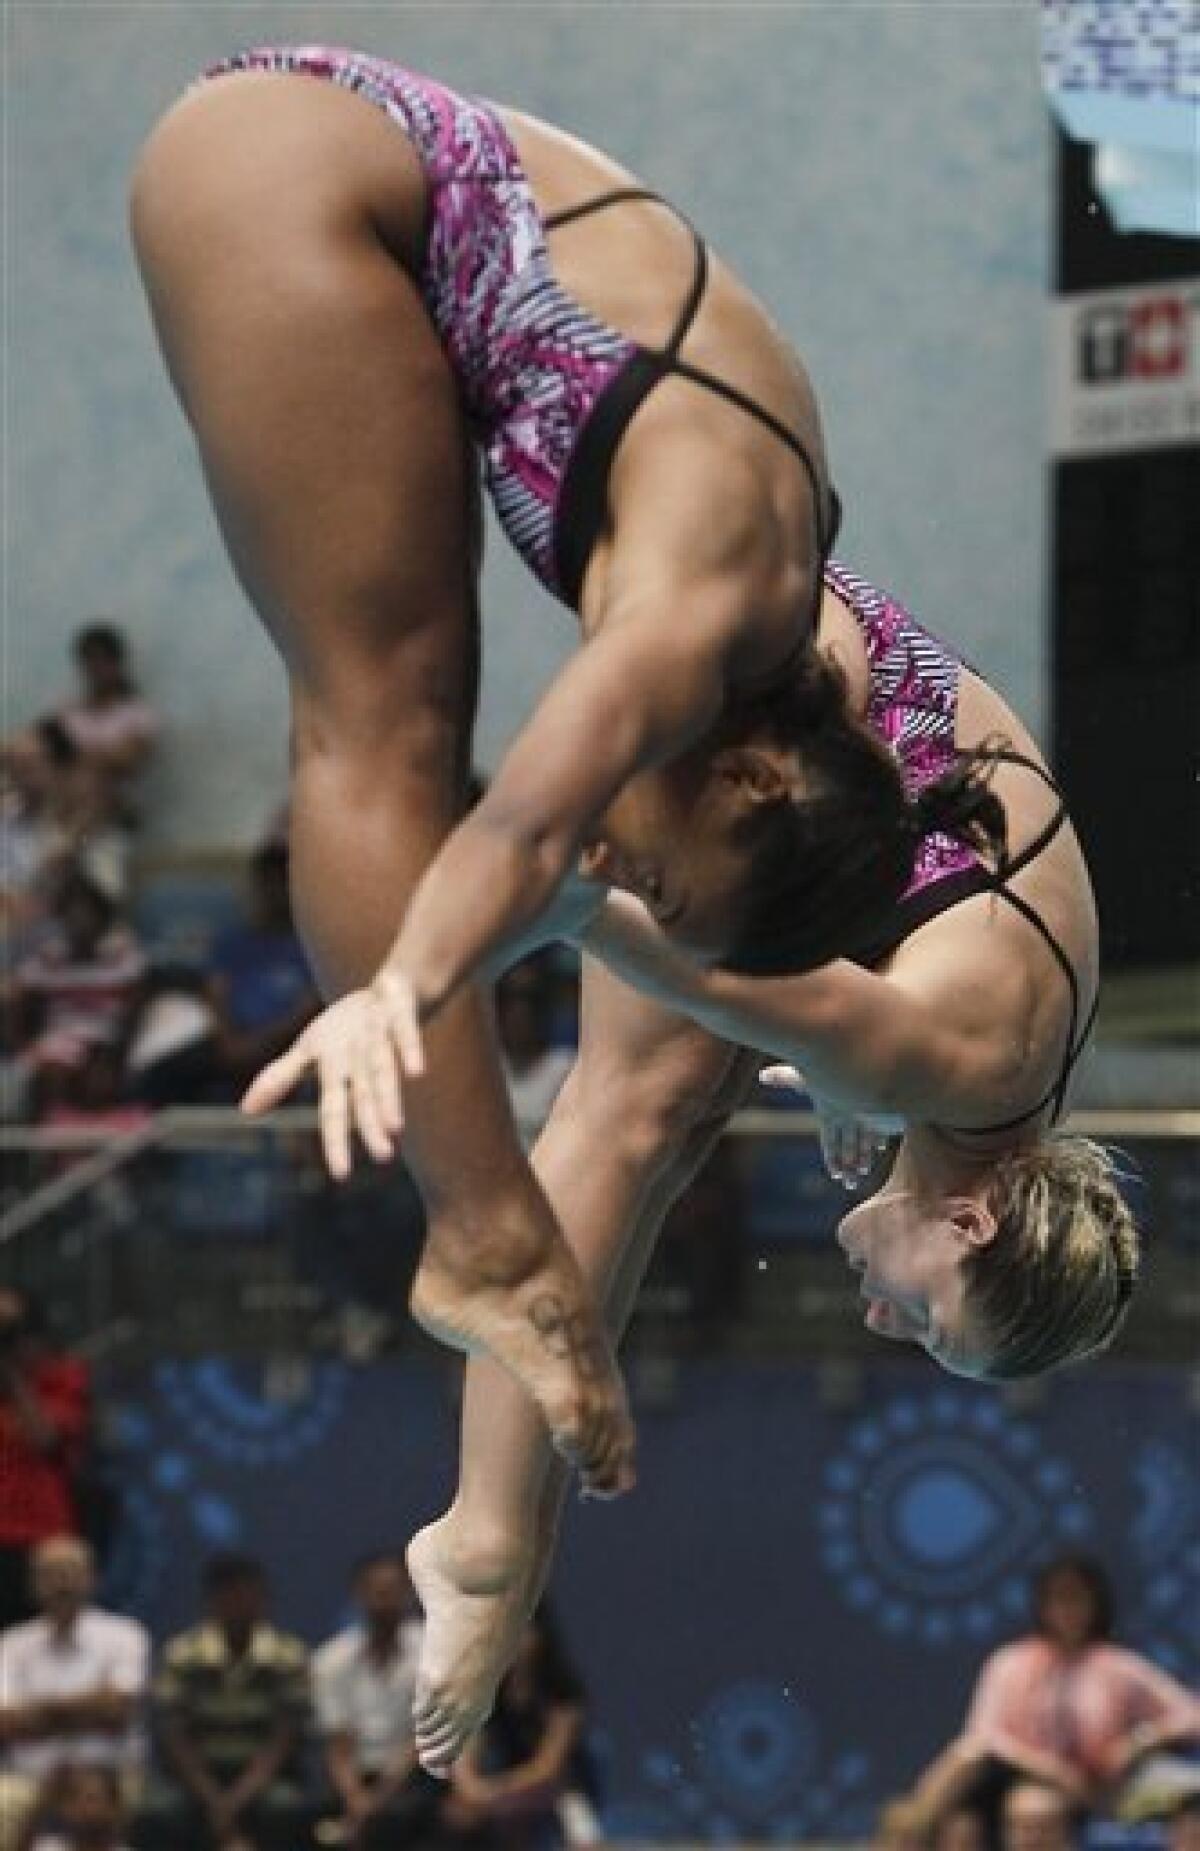 Canada's Jennifer Abel and Emile Heymans compete in the women's 3m springboard final to win the gold during the Commonwealth Games at the Dr. S.P. Mukherjee Aquatics Center in New Delhi, India, Sunday, Oct. 10, 2010. (AP Photo/Domenico Stinellis)